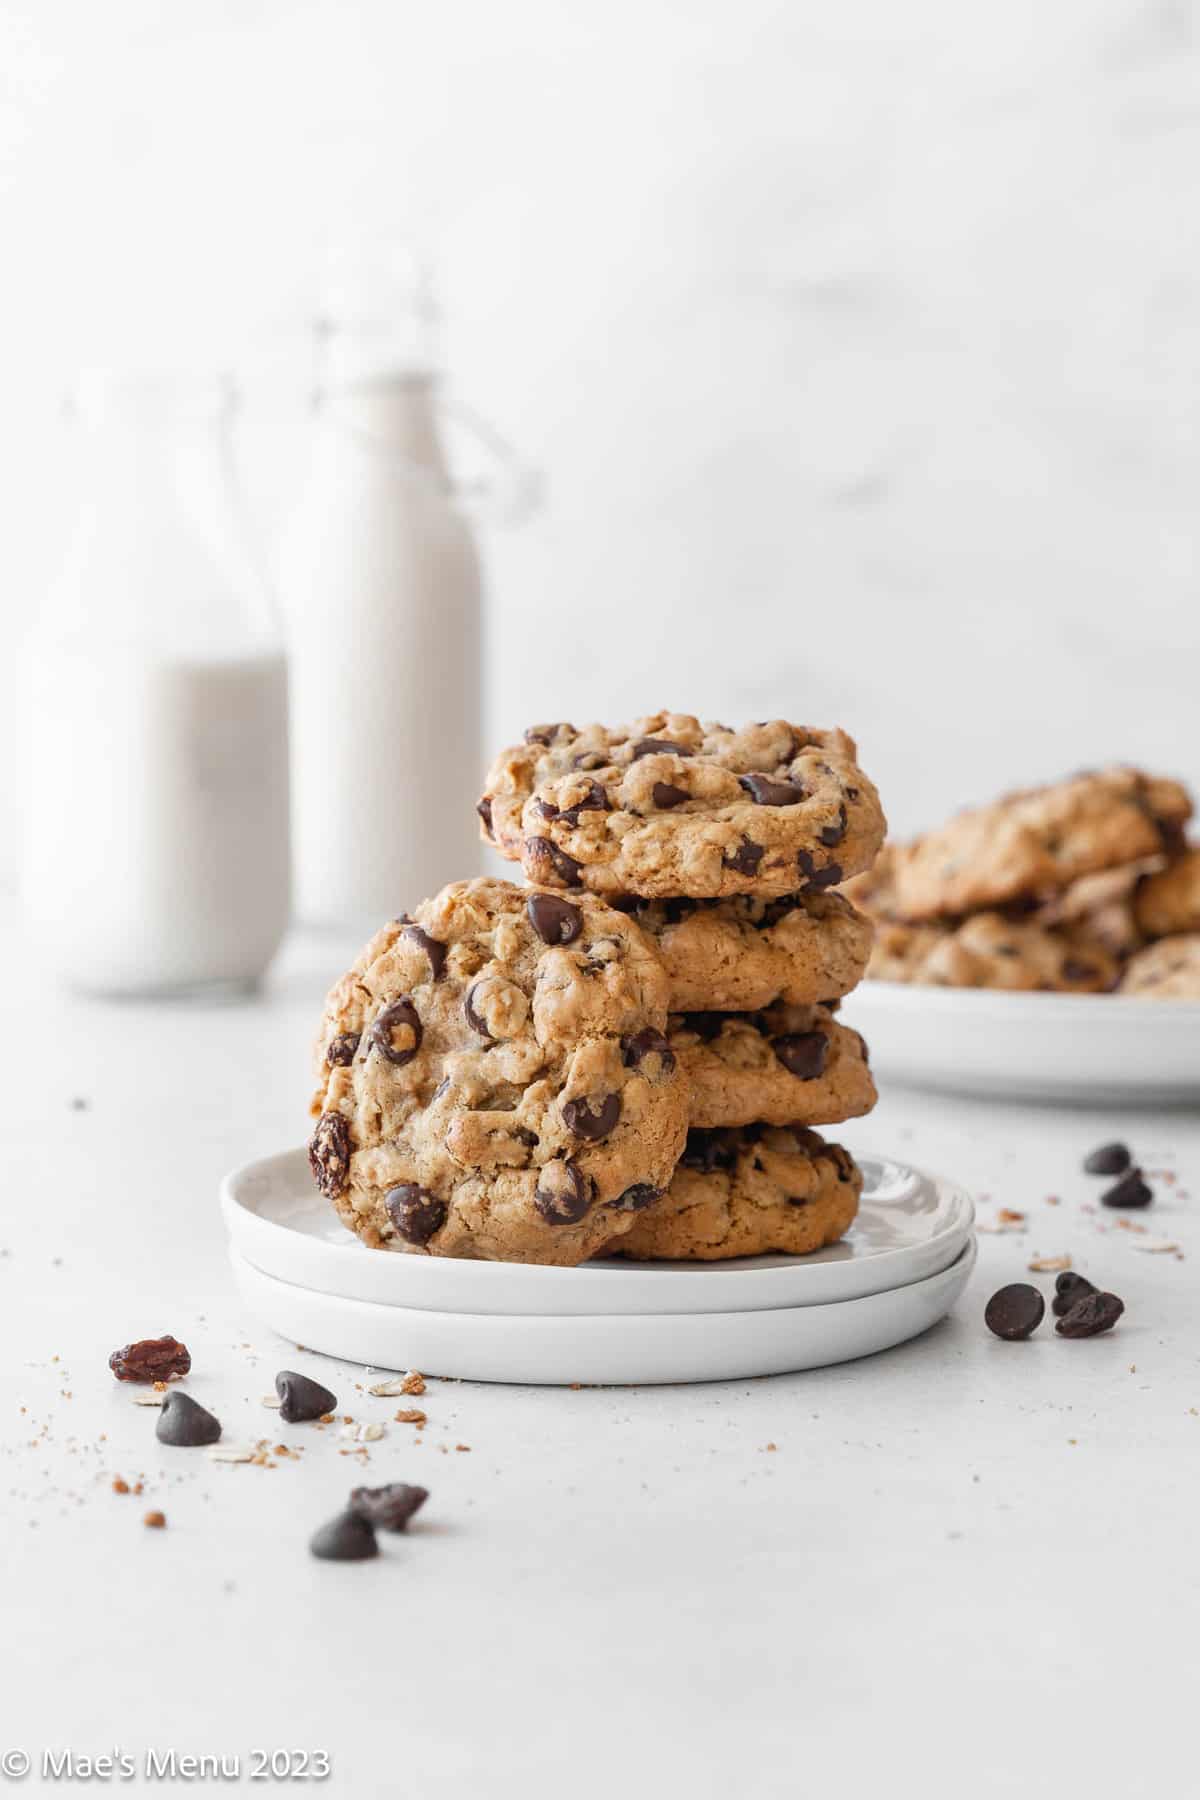 A stack of oatmeal raisin chocolate chip cookies on a white plate with chocolate chips and oatmeal on the counter.